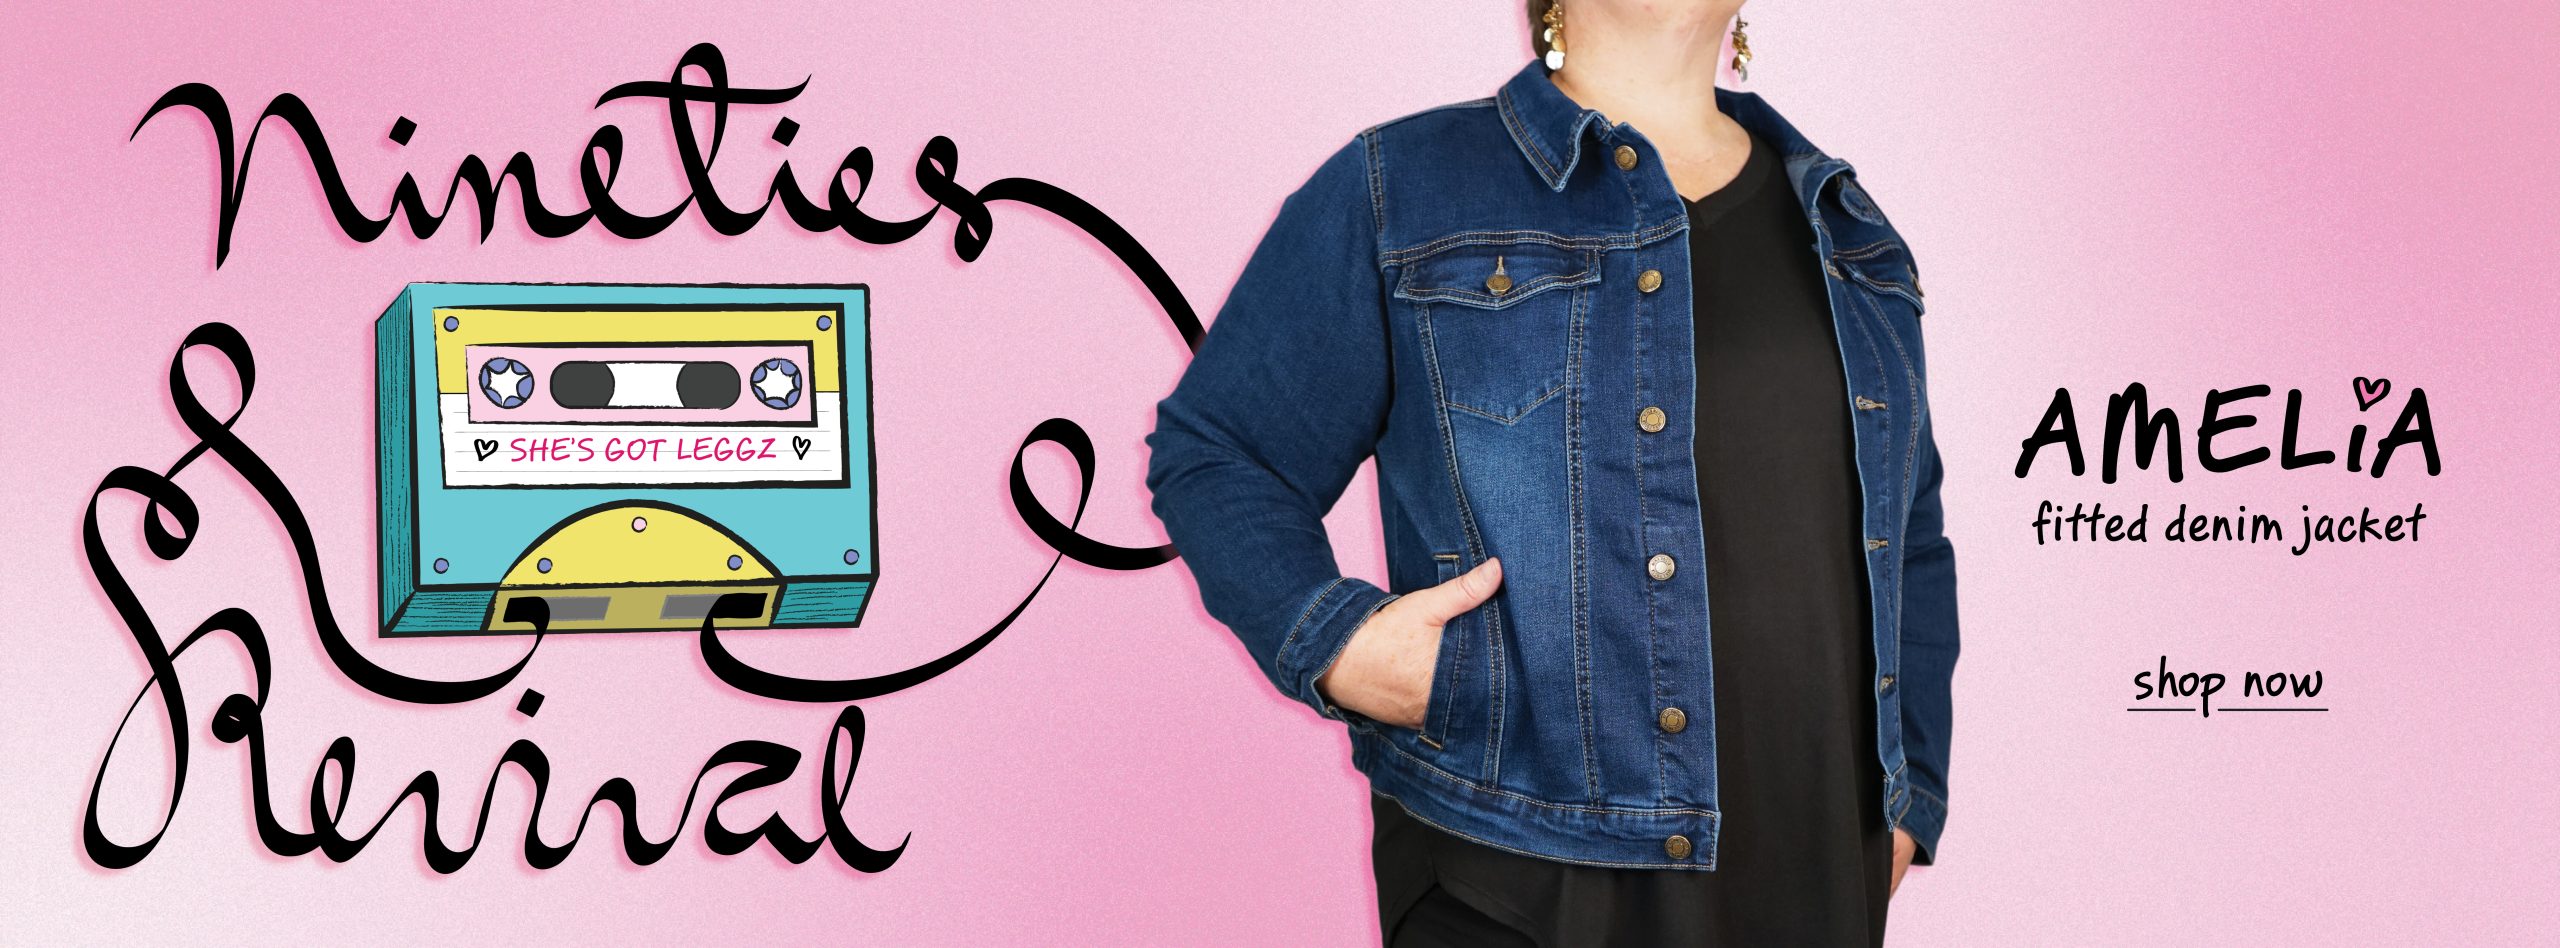 Banner that shows our new Amelia Fitted Denim Jacket. Text says "Nineties Revival" and "Shop Now"